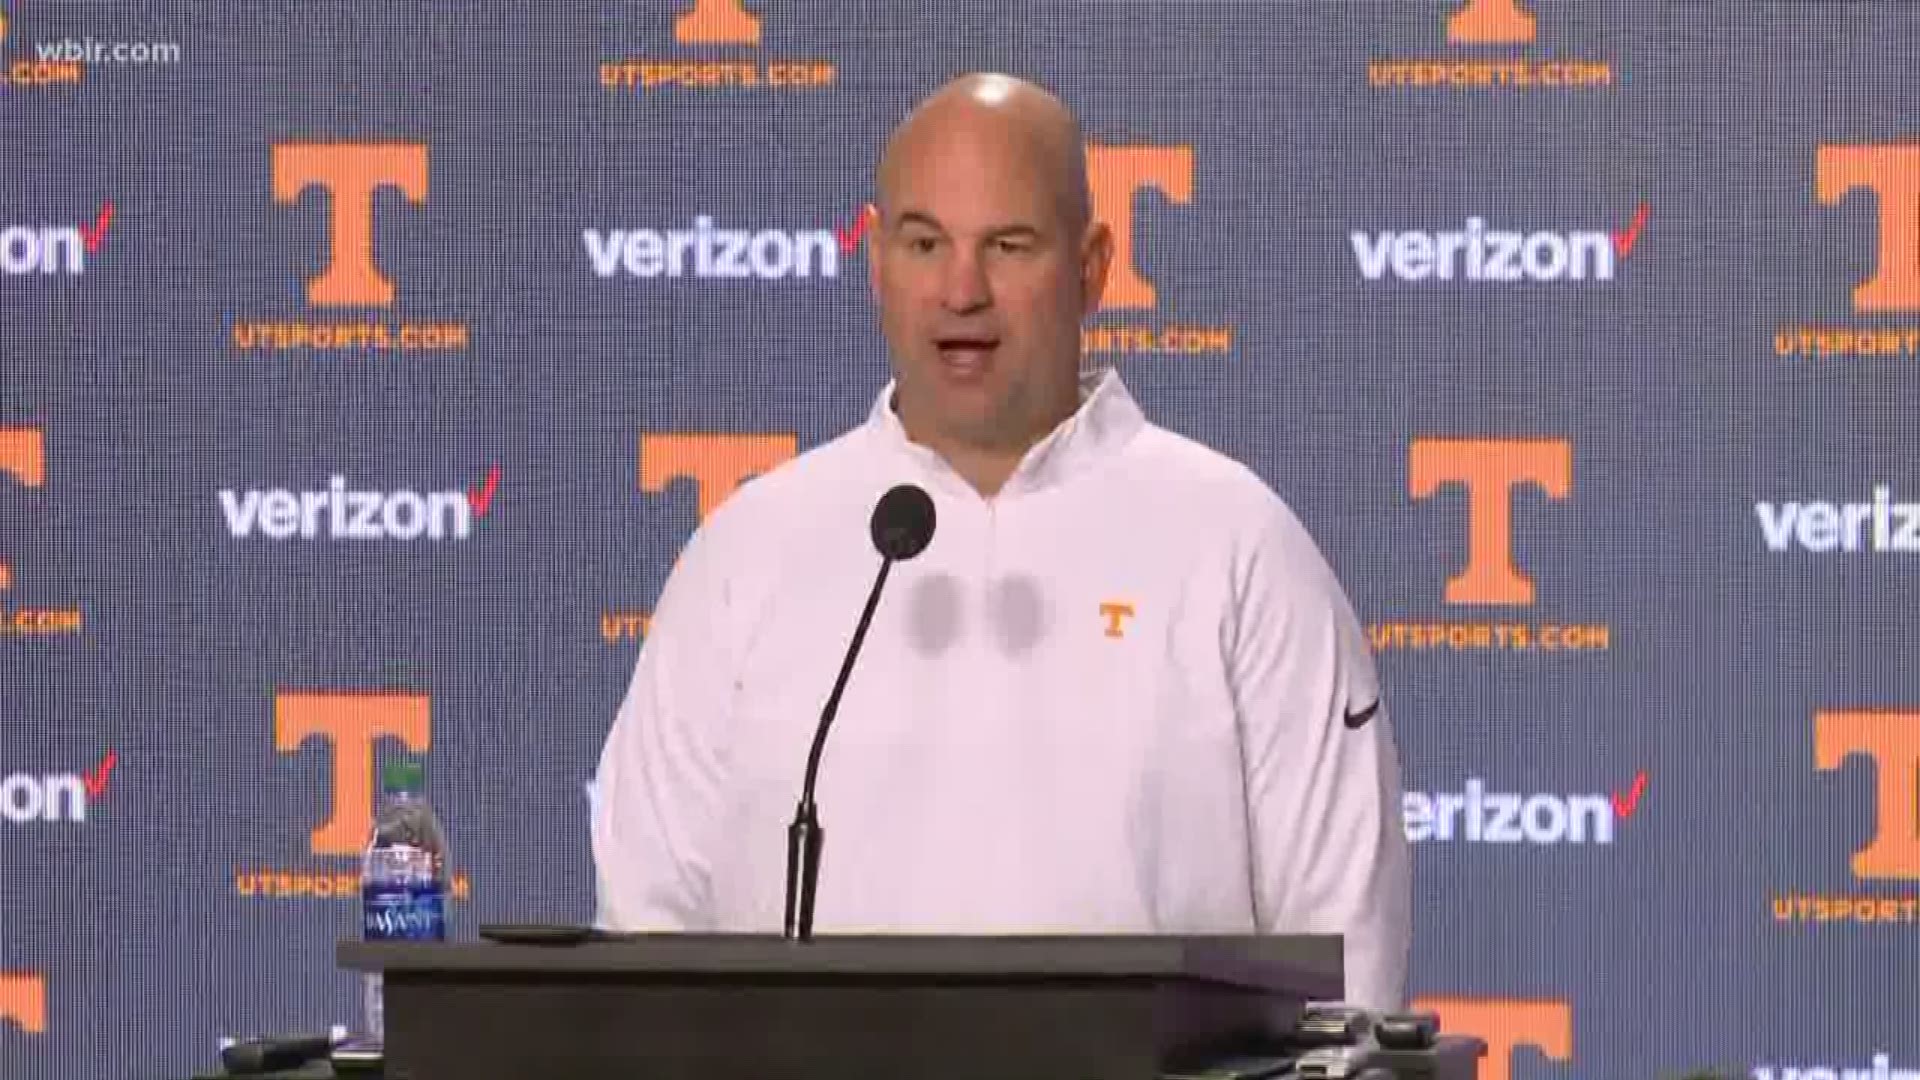 UT Football Head Coach Jeremy Pruitt is speaking to media now about the big win over Kentucky and the game ahead against Missouri.